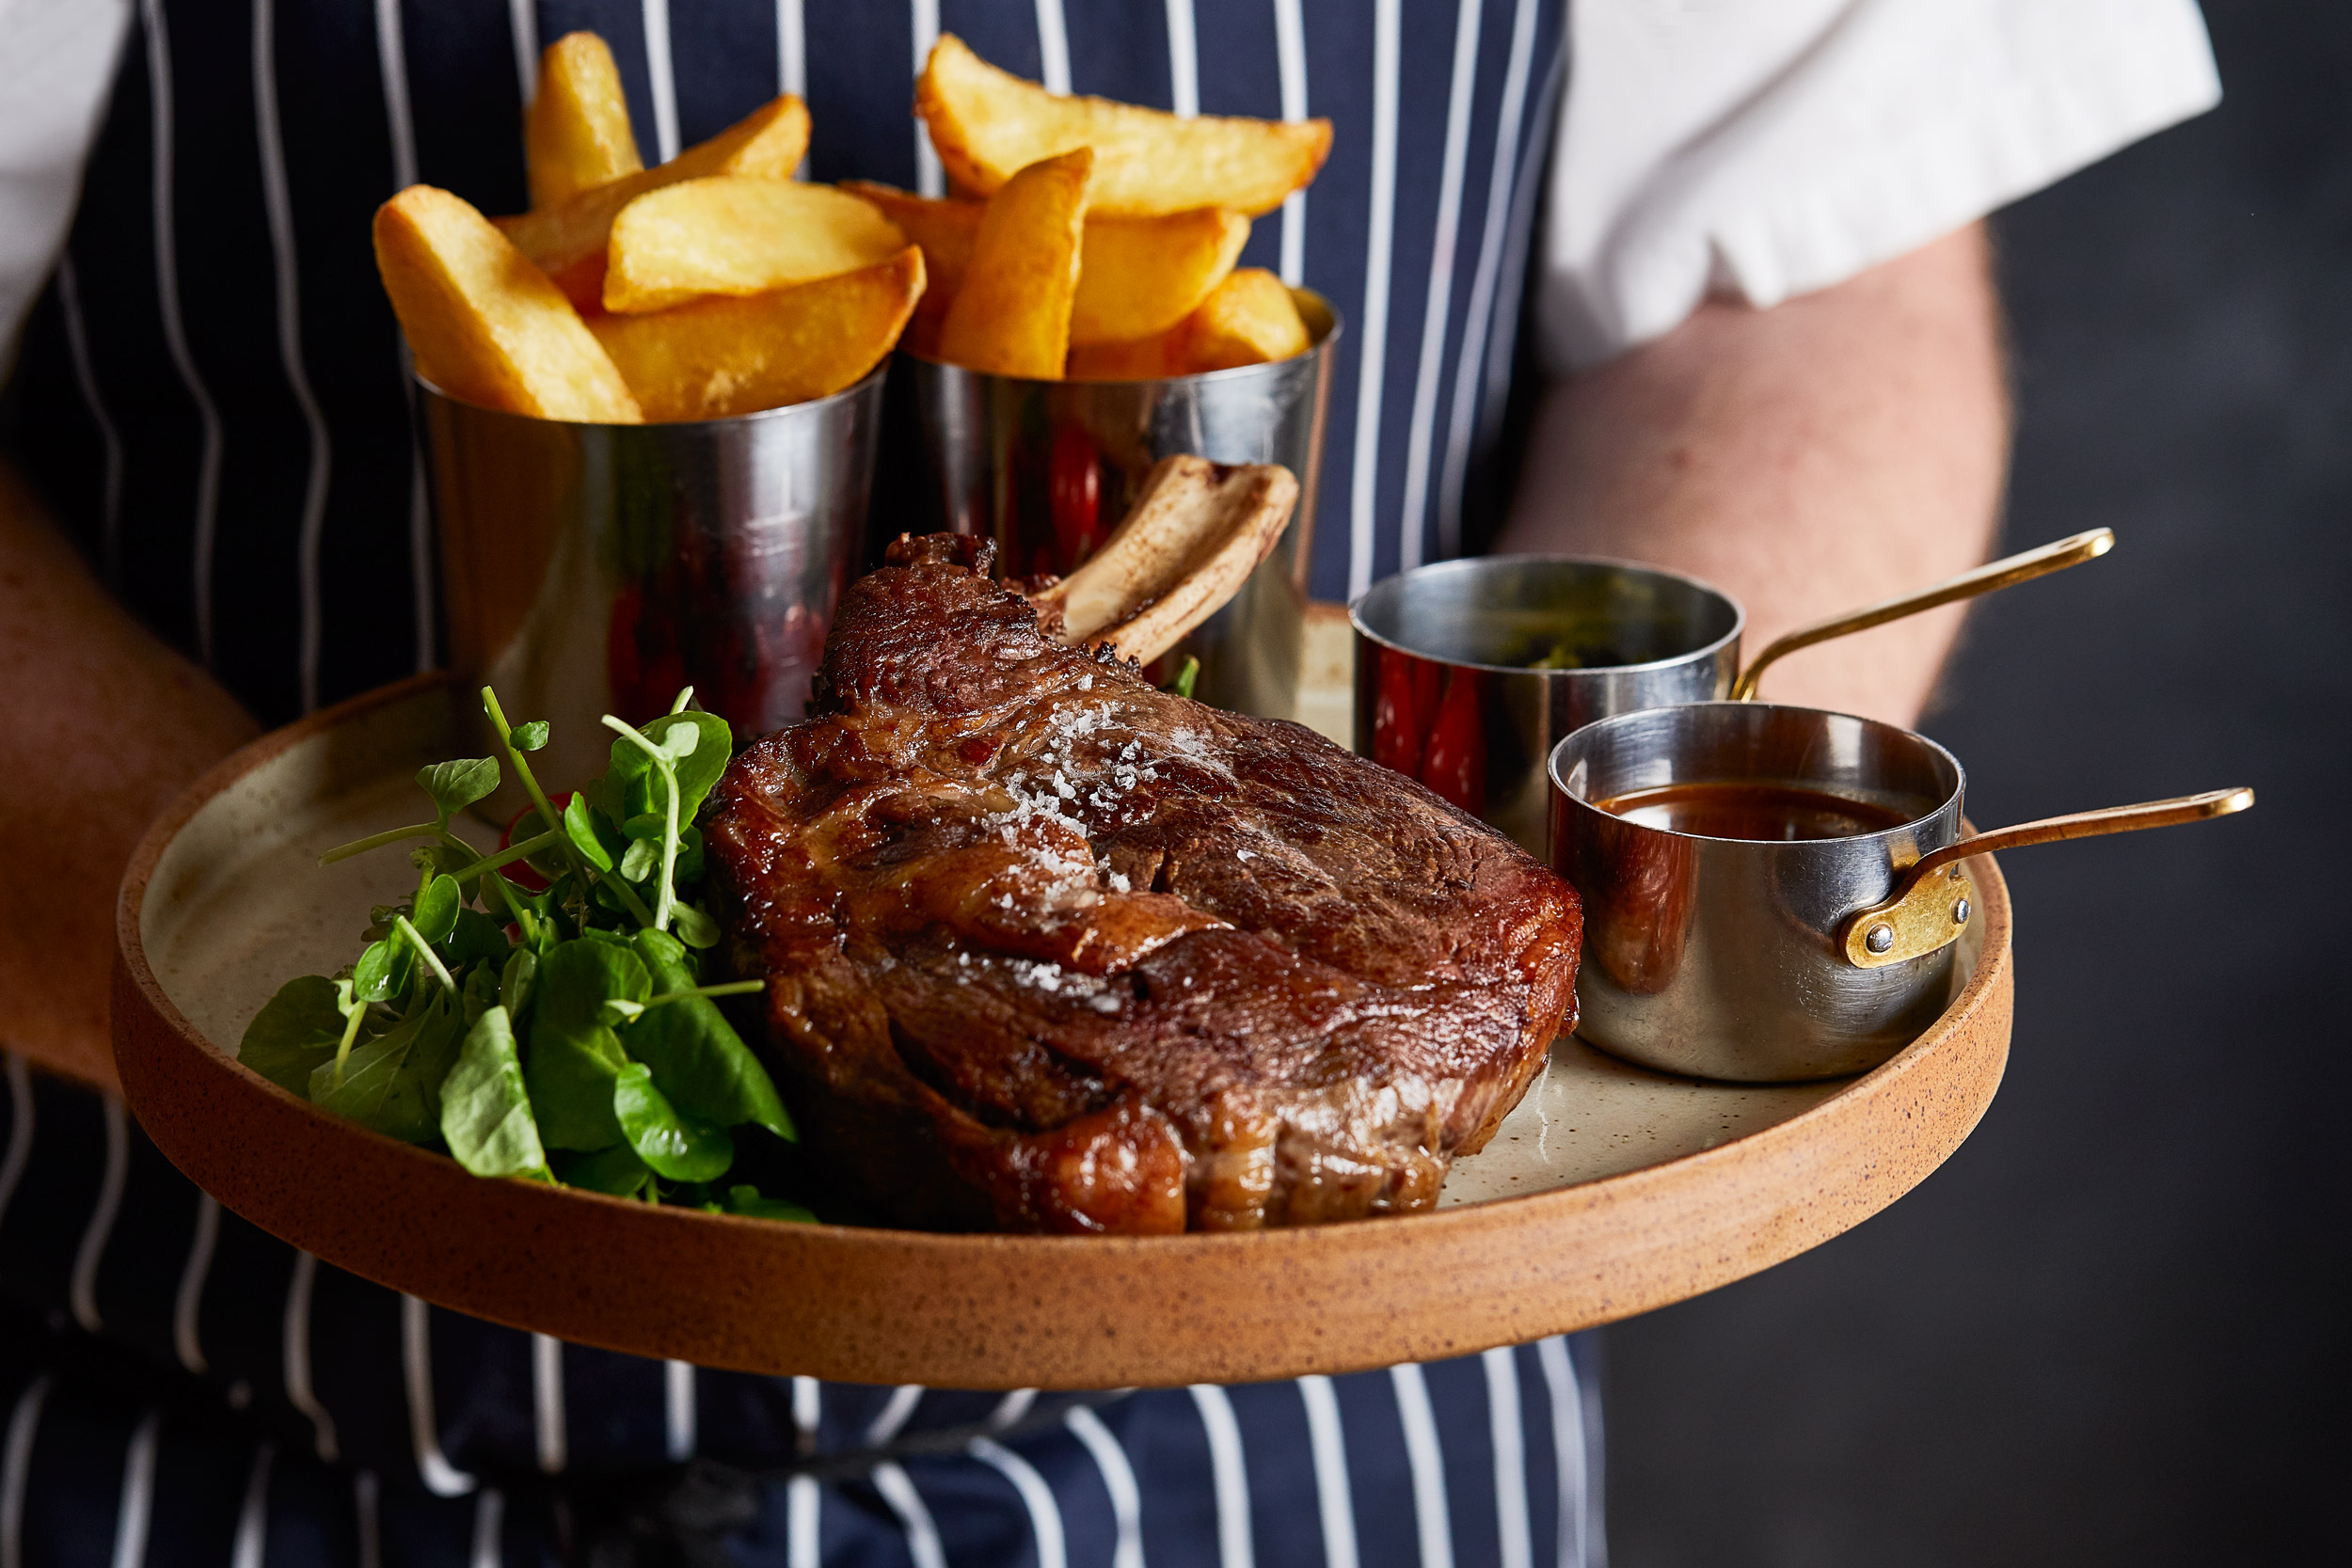 Chef holding a plate of Rib of Beef and Chips. Alastair Ferrier food and drink photographer, Edinburgh.